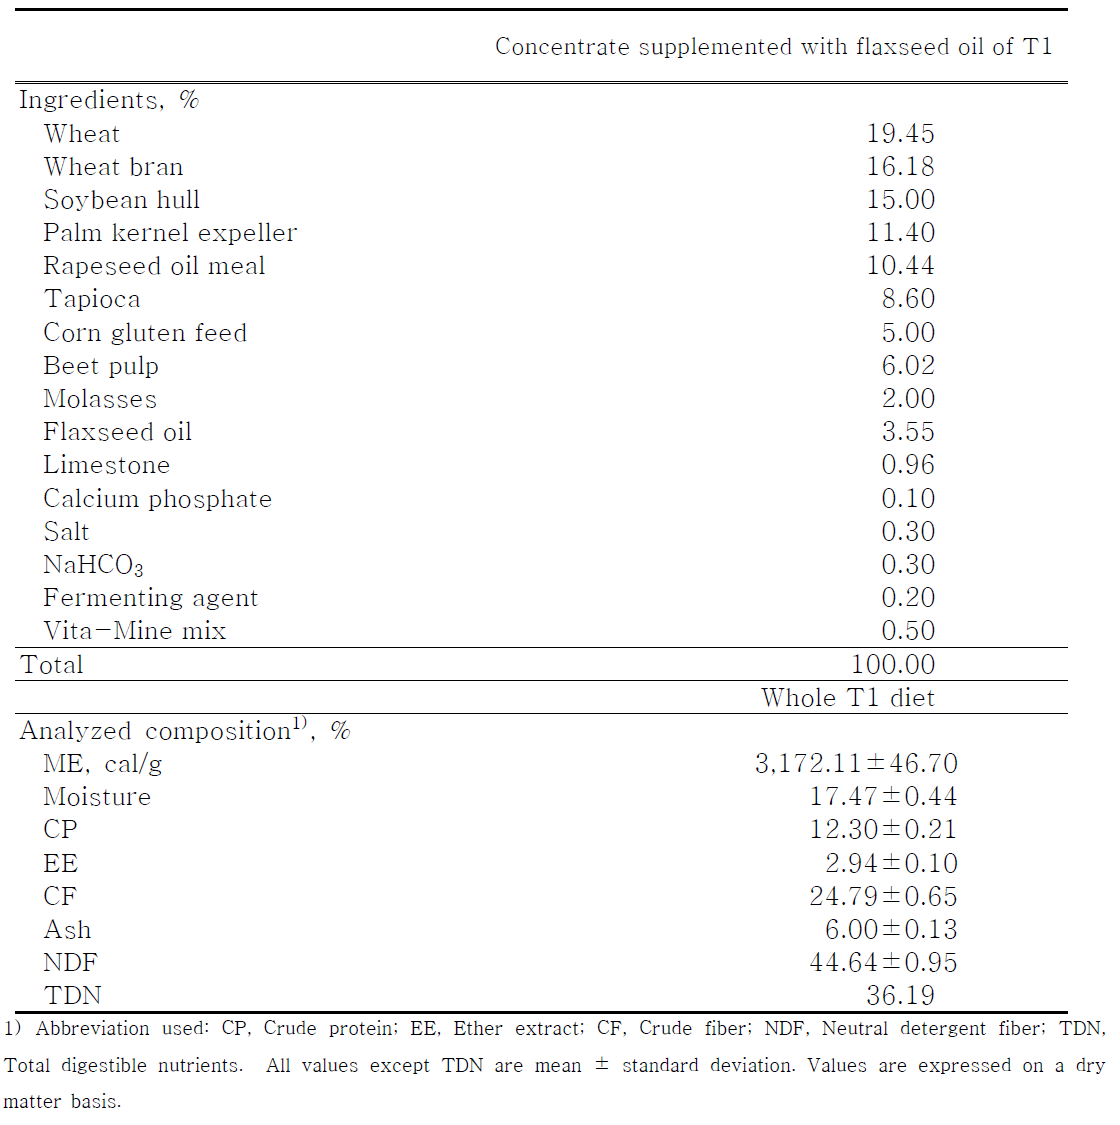 Formulation and analytical nutrient content of experimental T1 diets